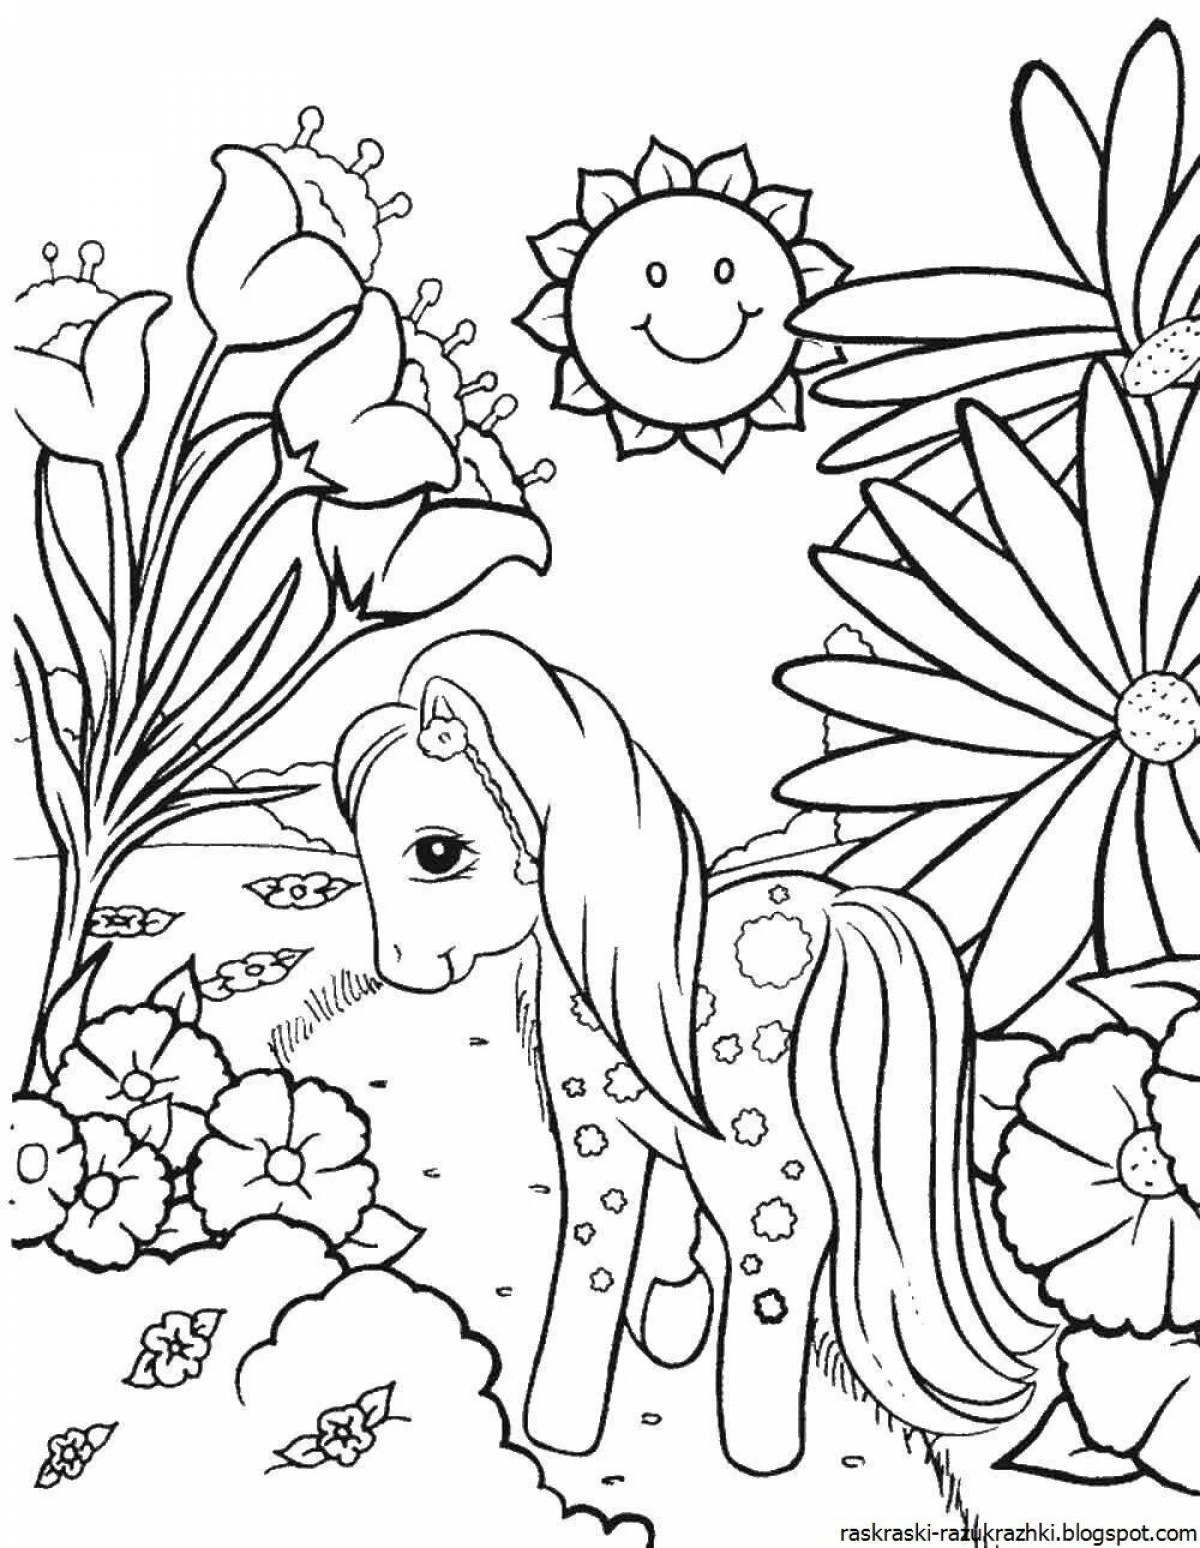 Bright coloring pages, interesting for girls 8 years old